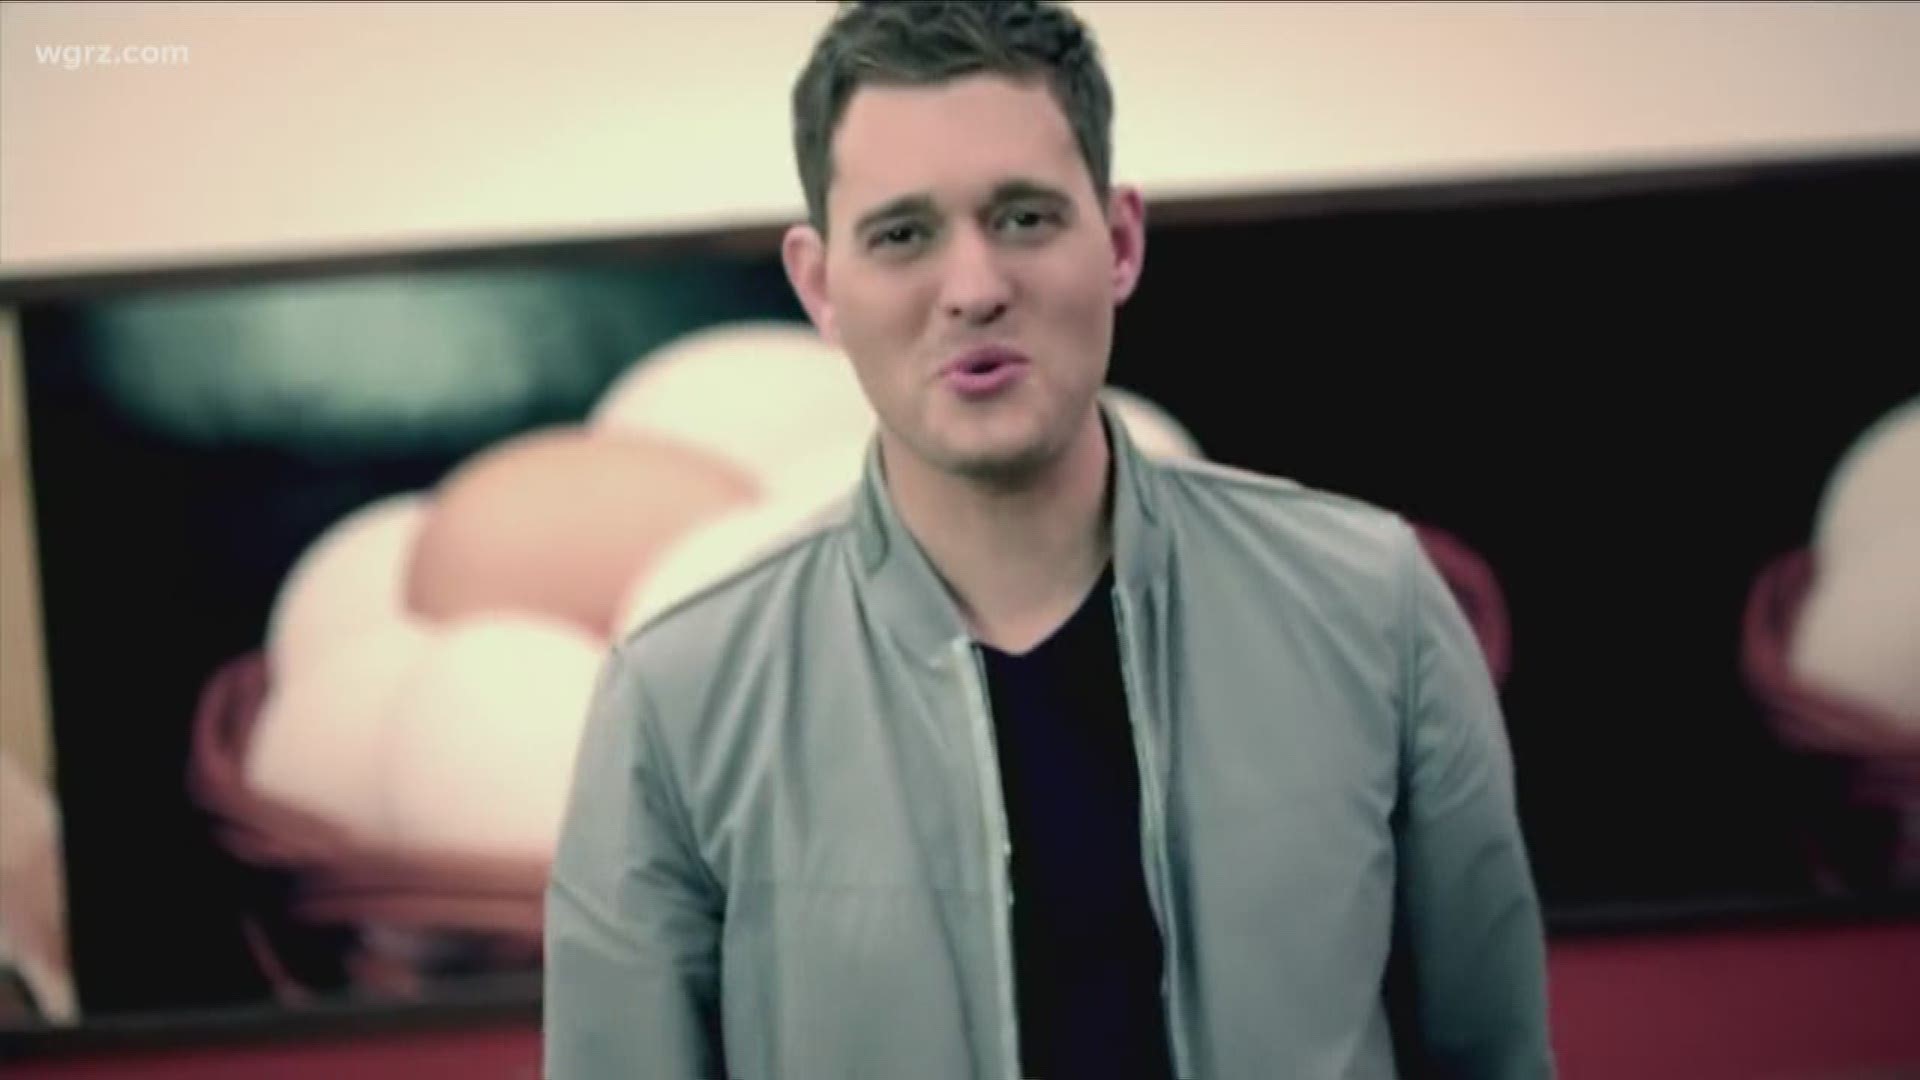 Michael Buble At Keybank Center Feb. 27th